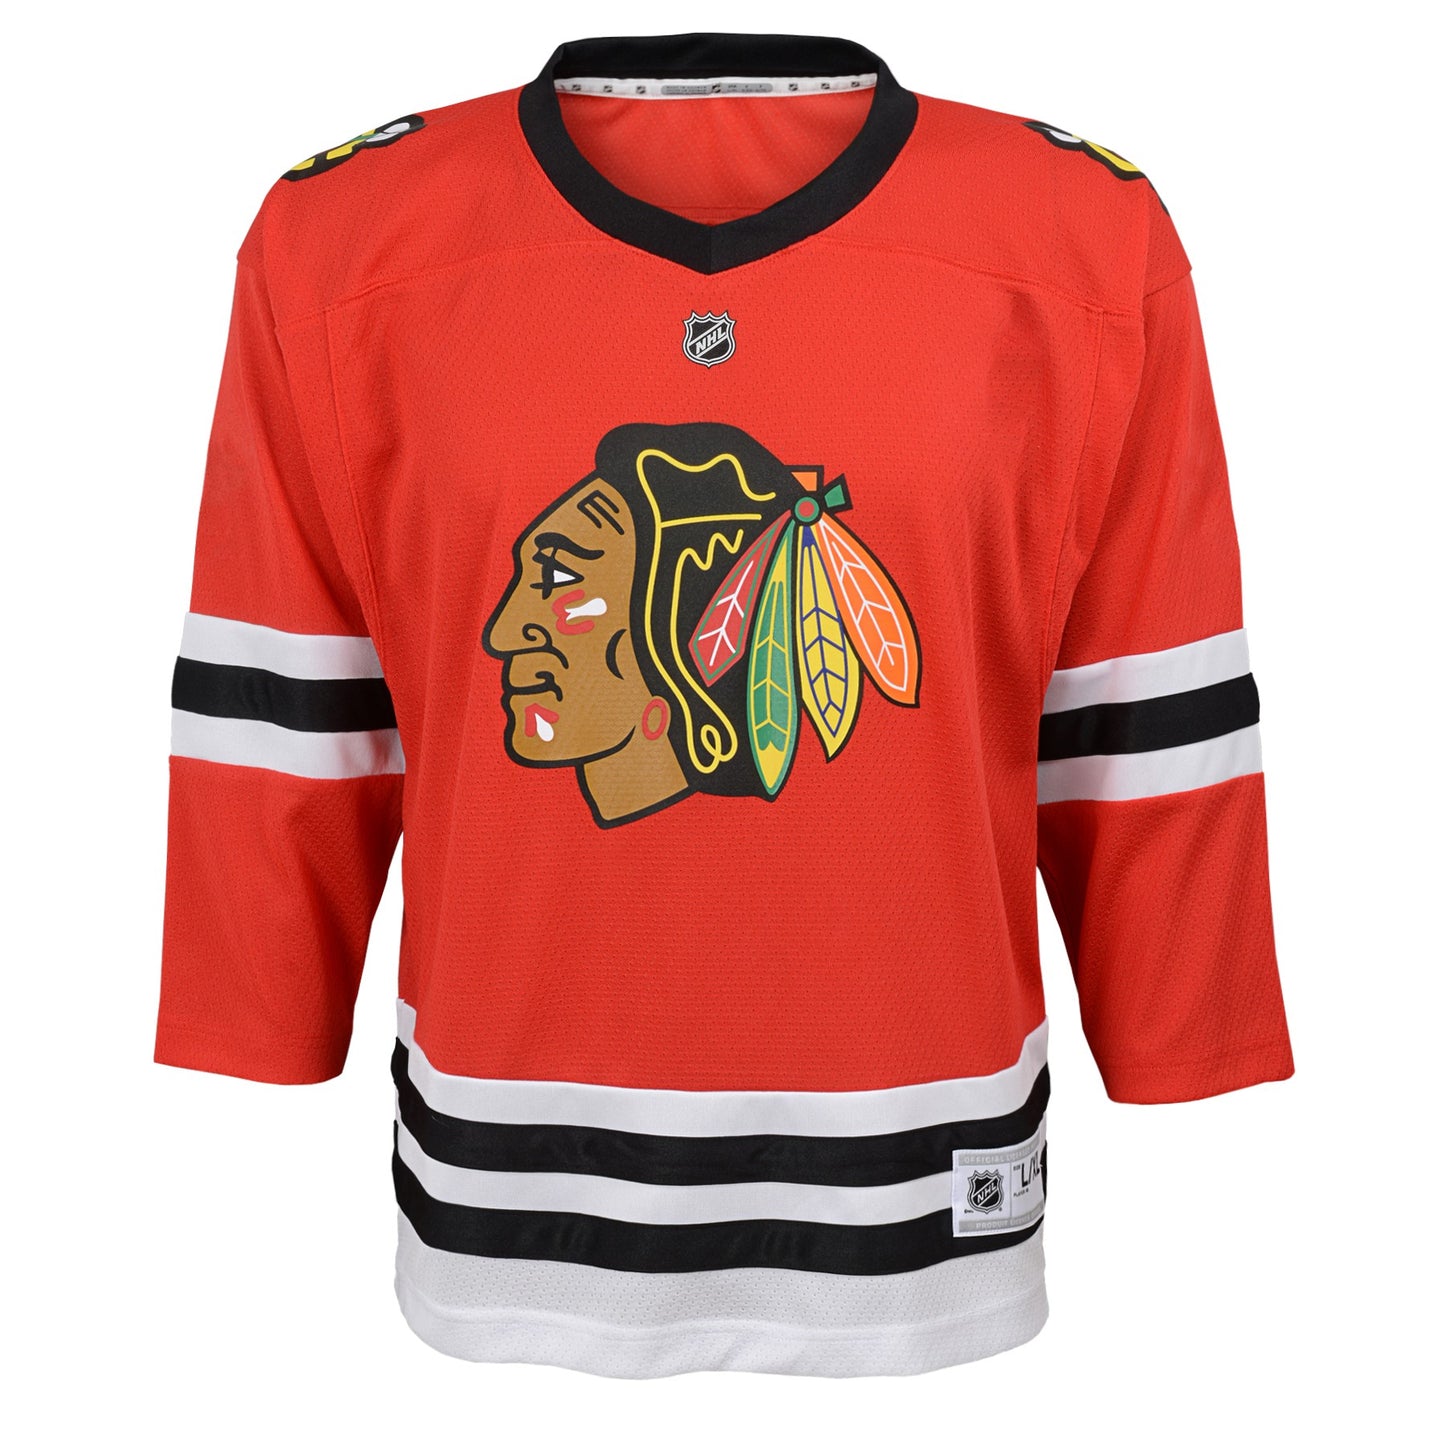 Toddler Connor Bedard Chicago Blackhawks Red Home Replica Jersey (Size 2-4T)